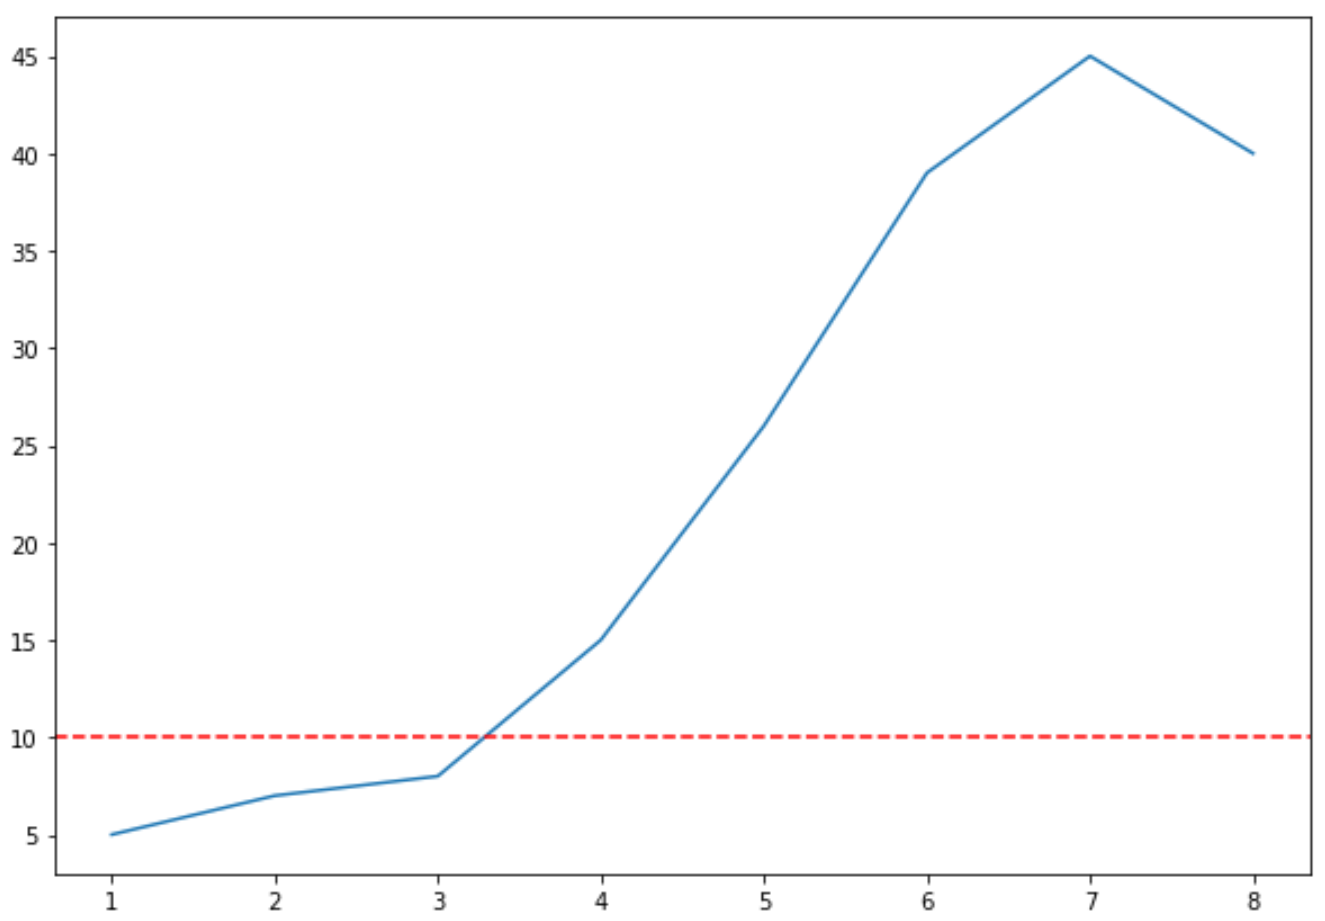 How to draw a horizontal line in Matplotlib